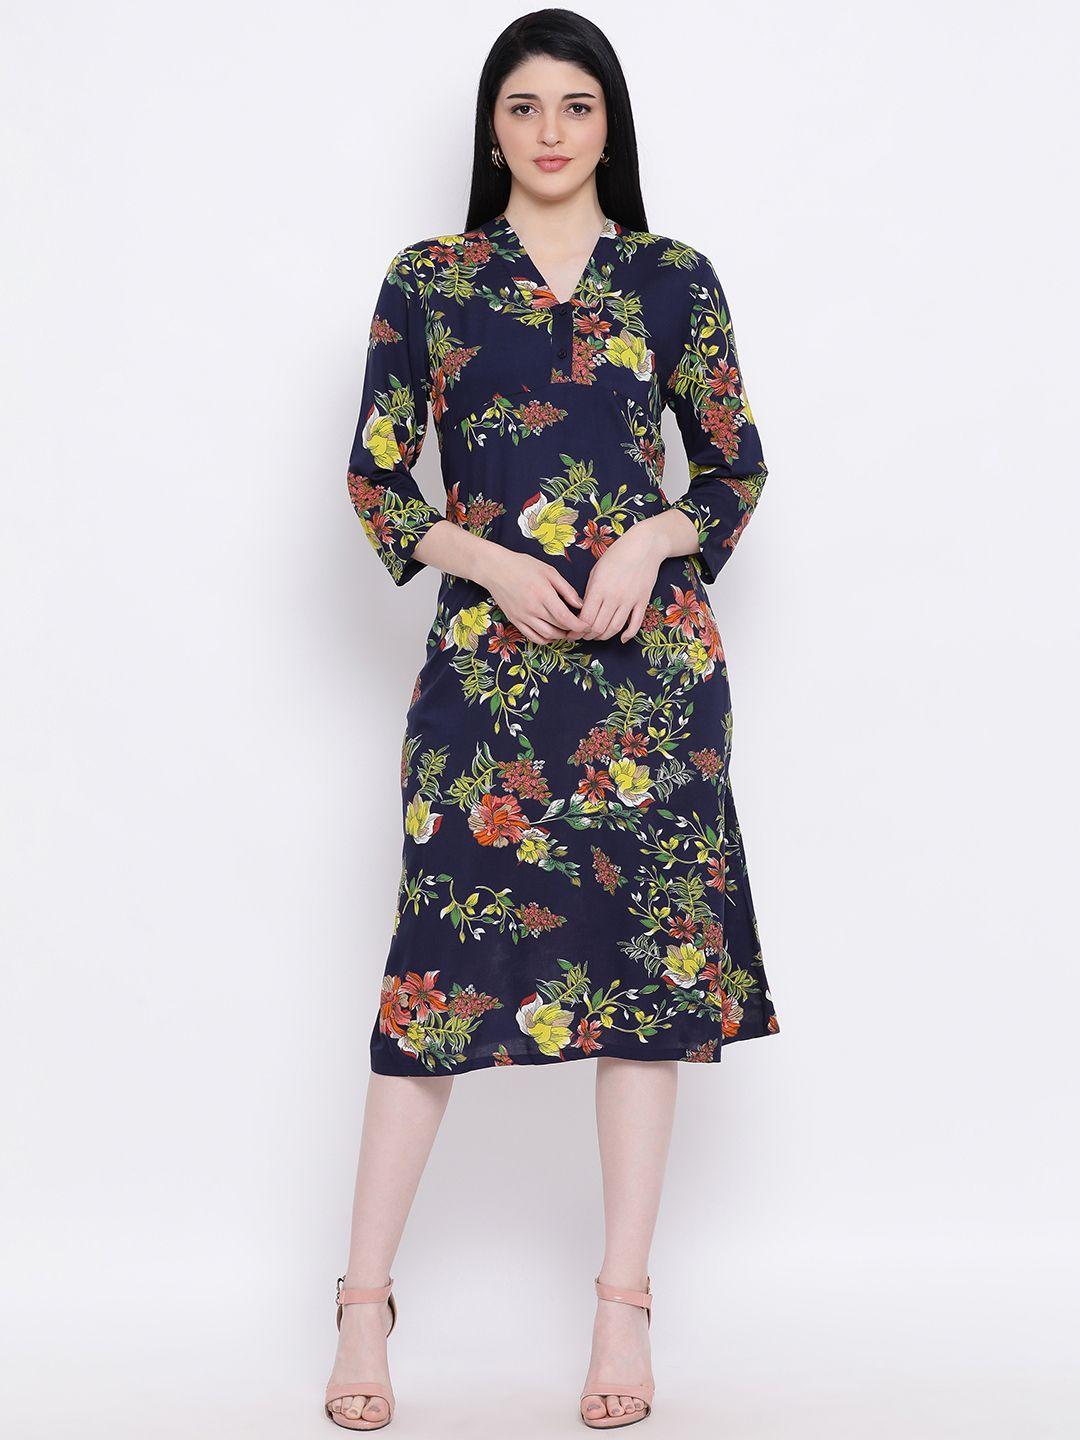 oxolloxo women multicoloured floral print fit and flare dress